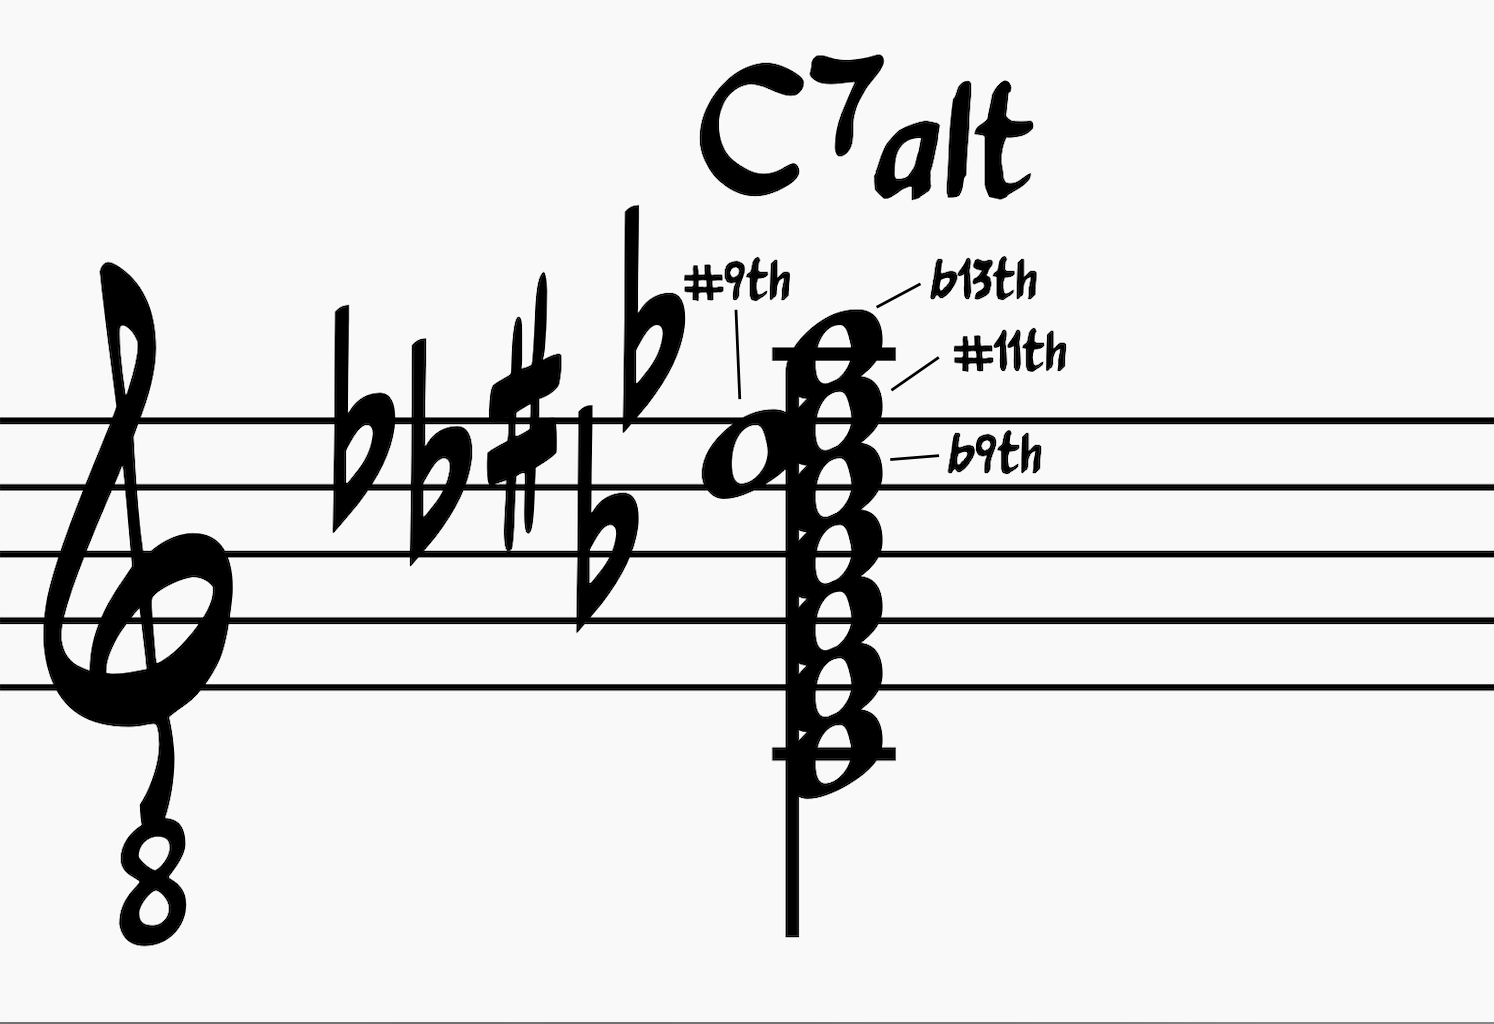 Altered Scale: C7alt chord symbol showing all the altered extensions: b9, #9, #11 (b5), and #5 (b13); close root position chord voicing